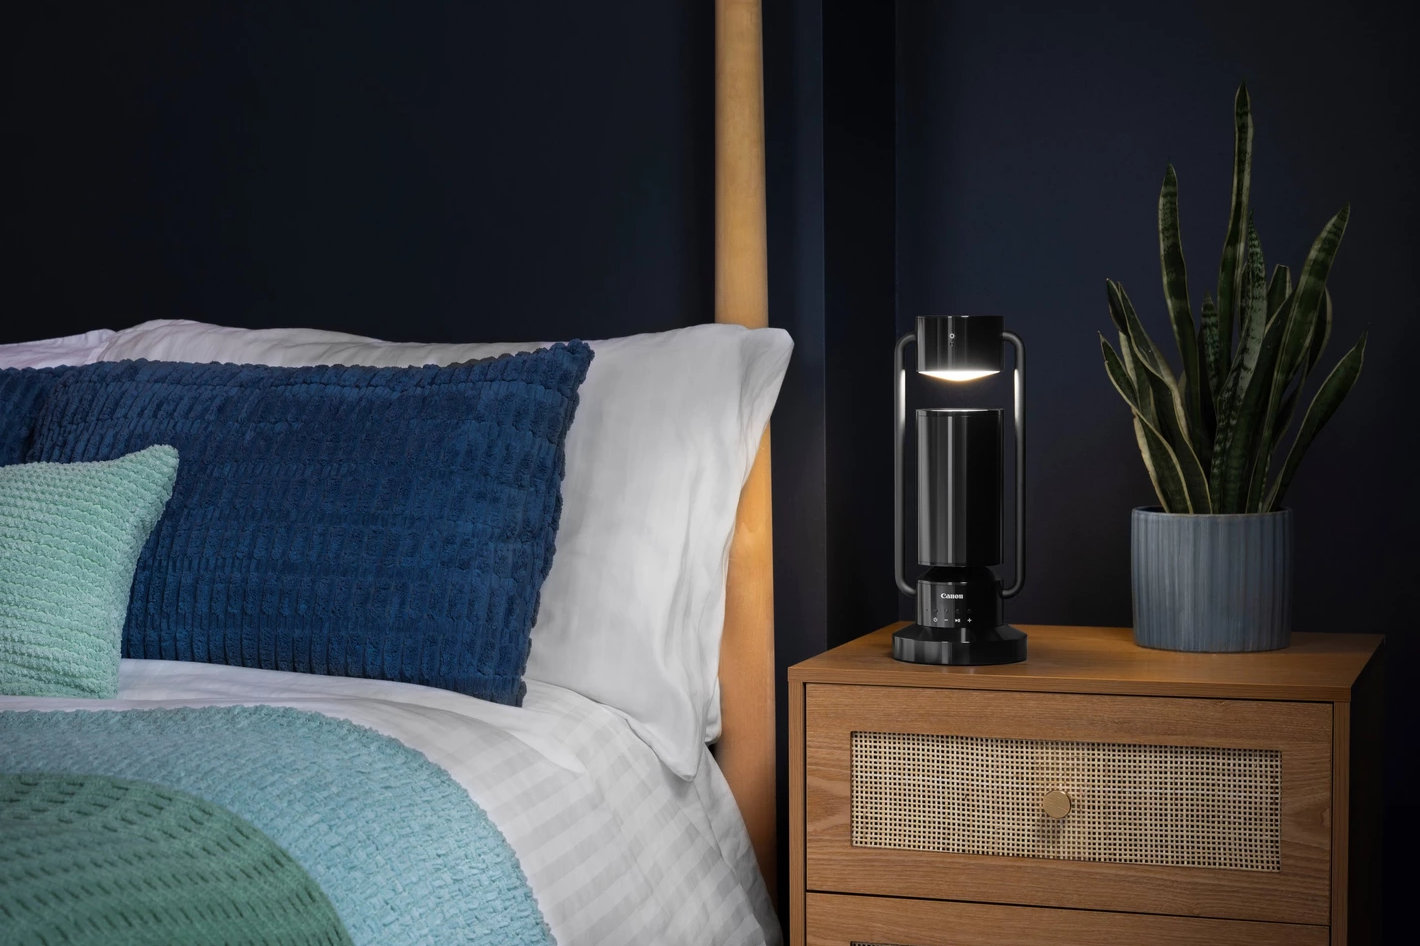 New Canon product is a… lamp and speaker!